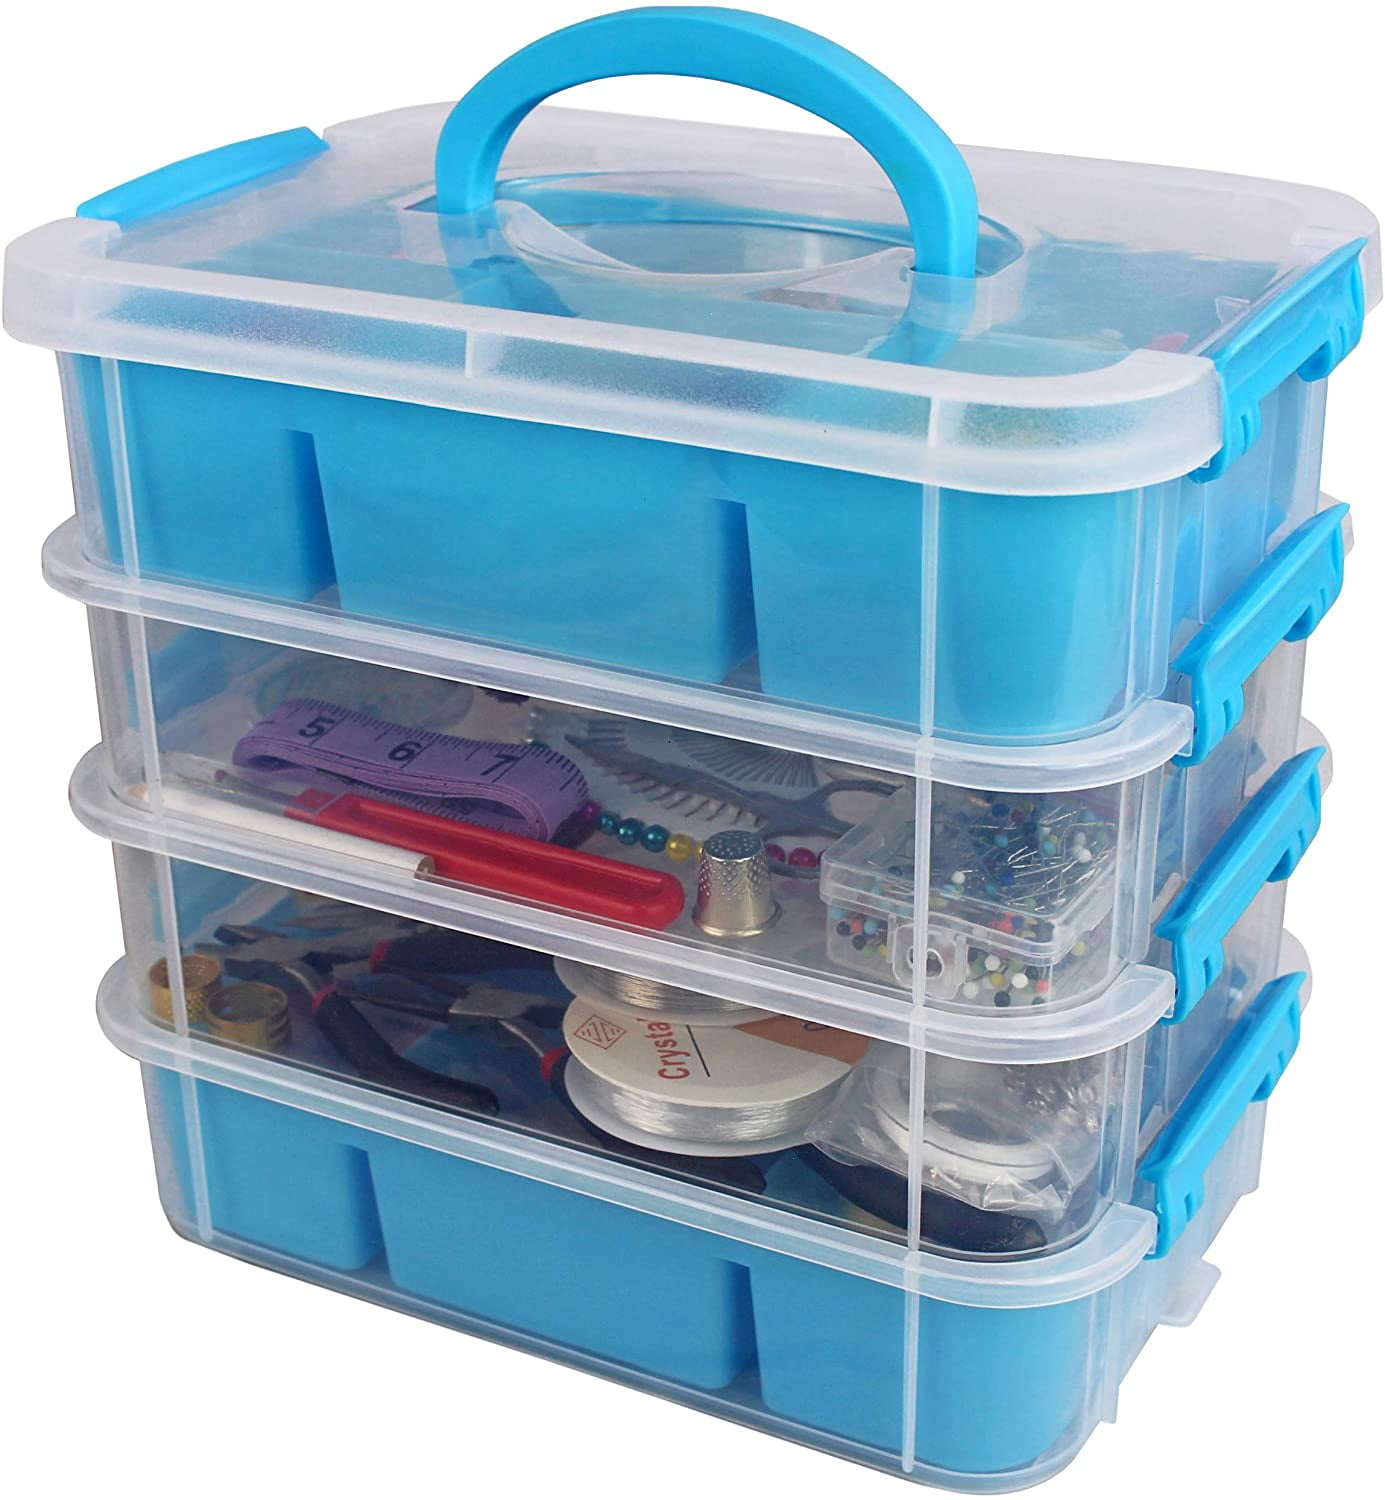 Cntb111 6 Storage Stackable Containers for Beads Crafts 2.75